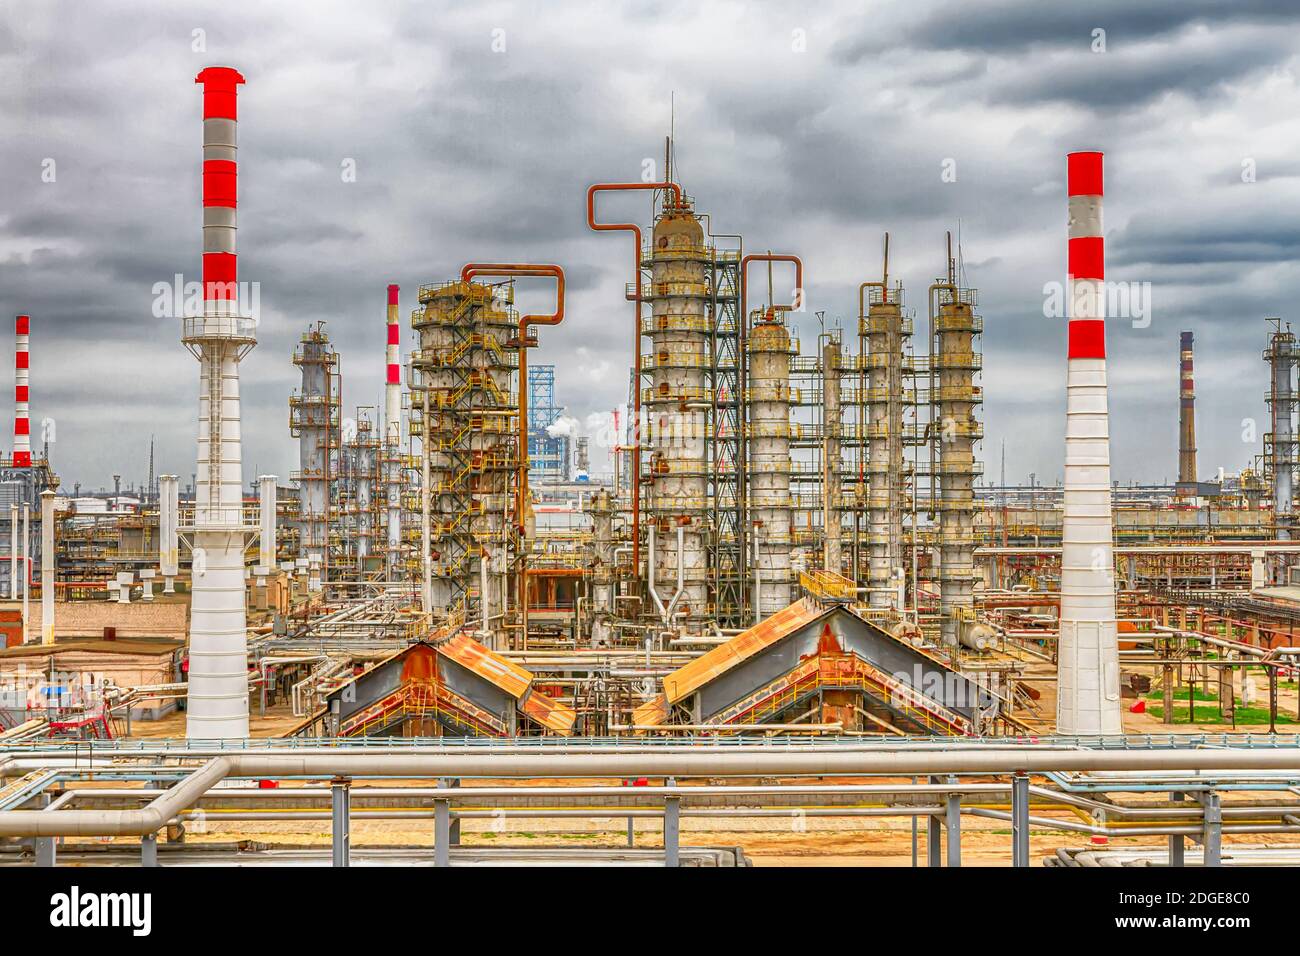 View of the new columns and chemical apparatus plant for oil refining at refinery Stock Photo